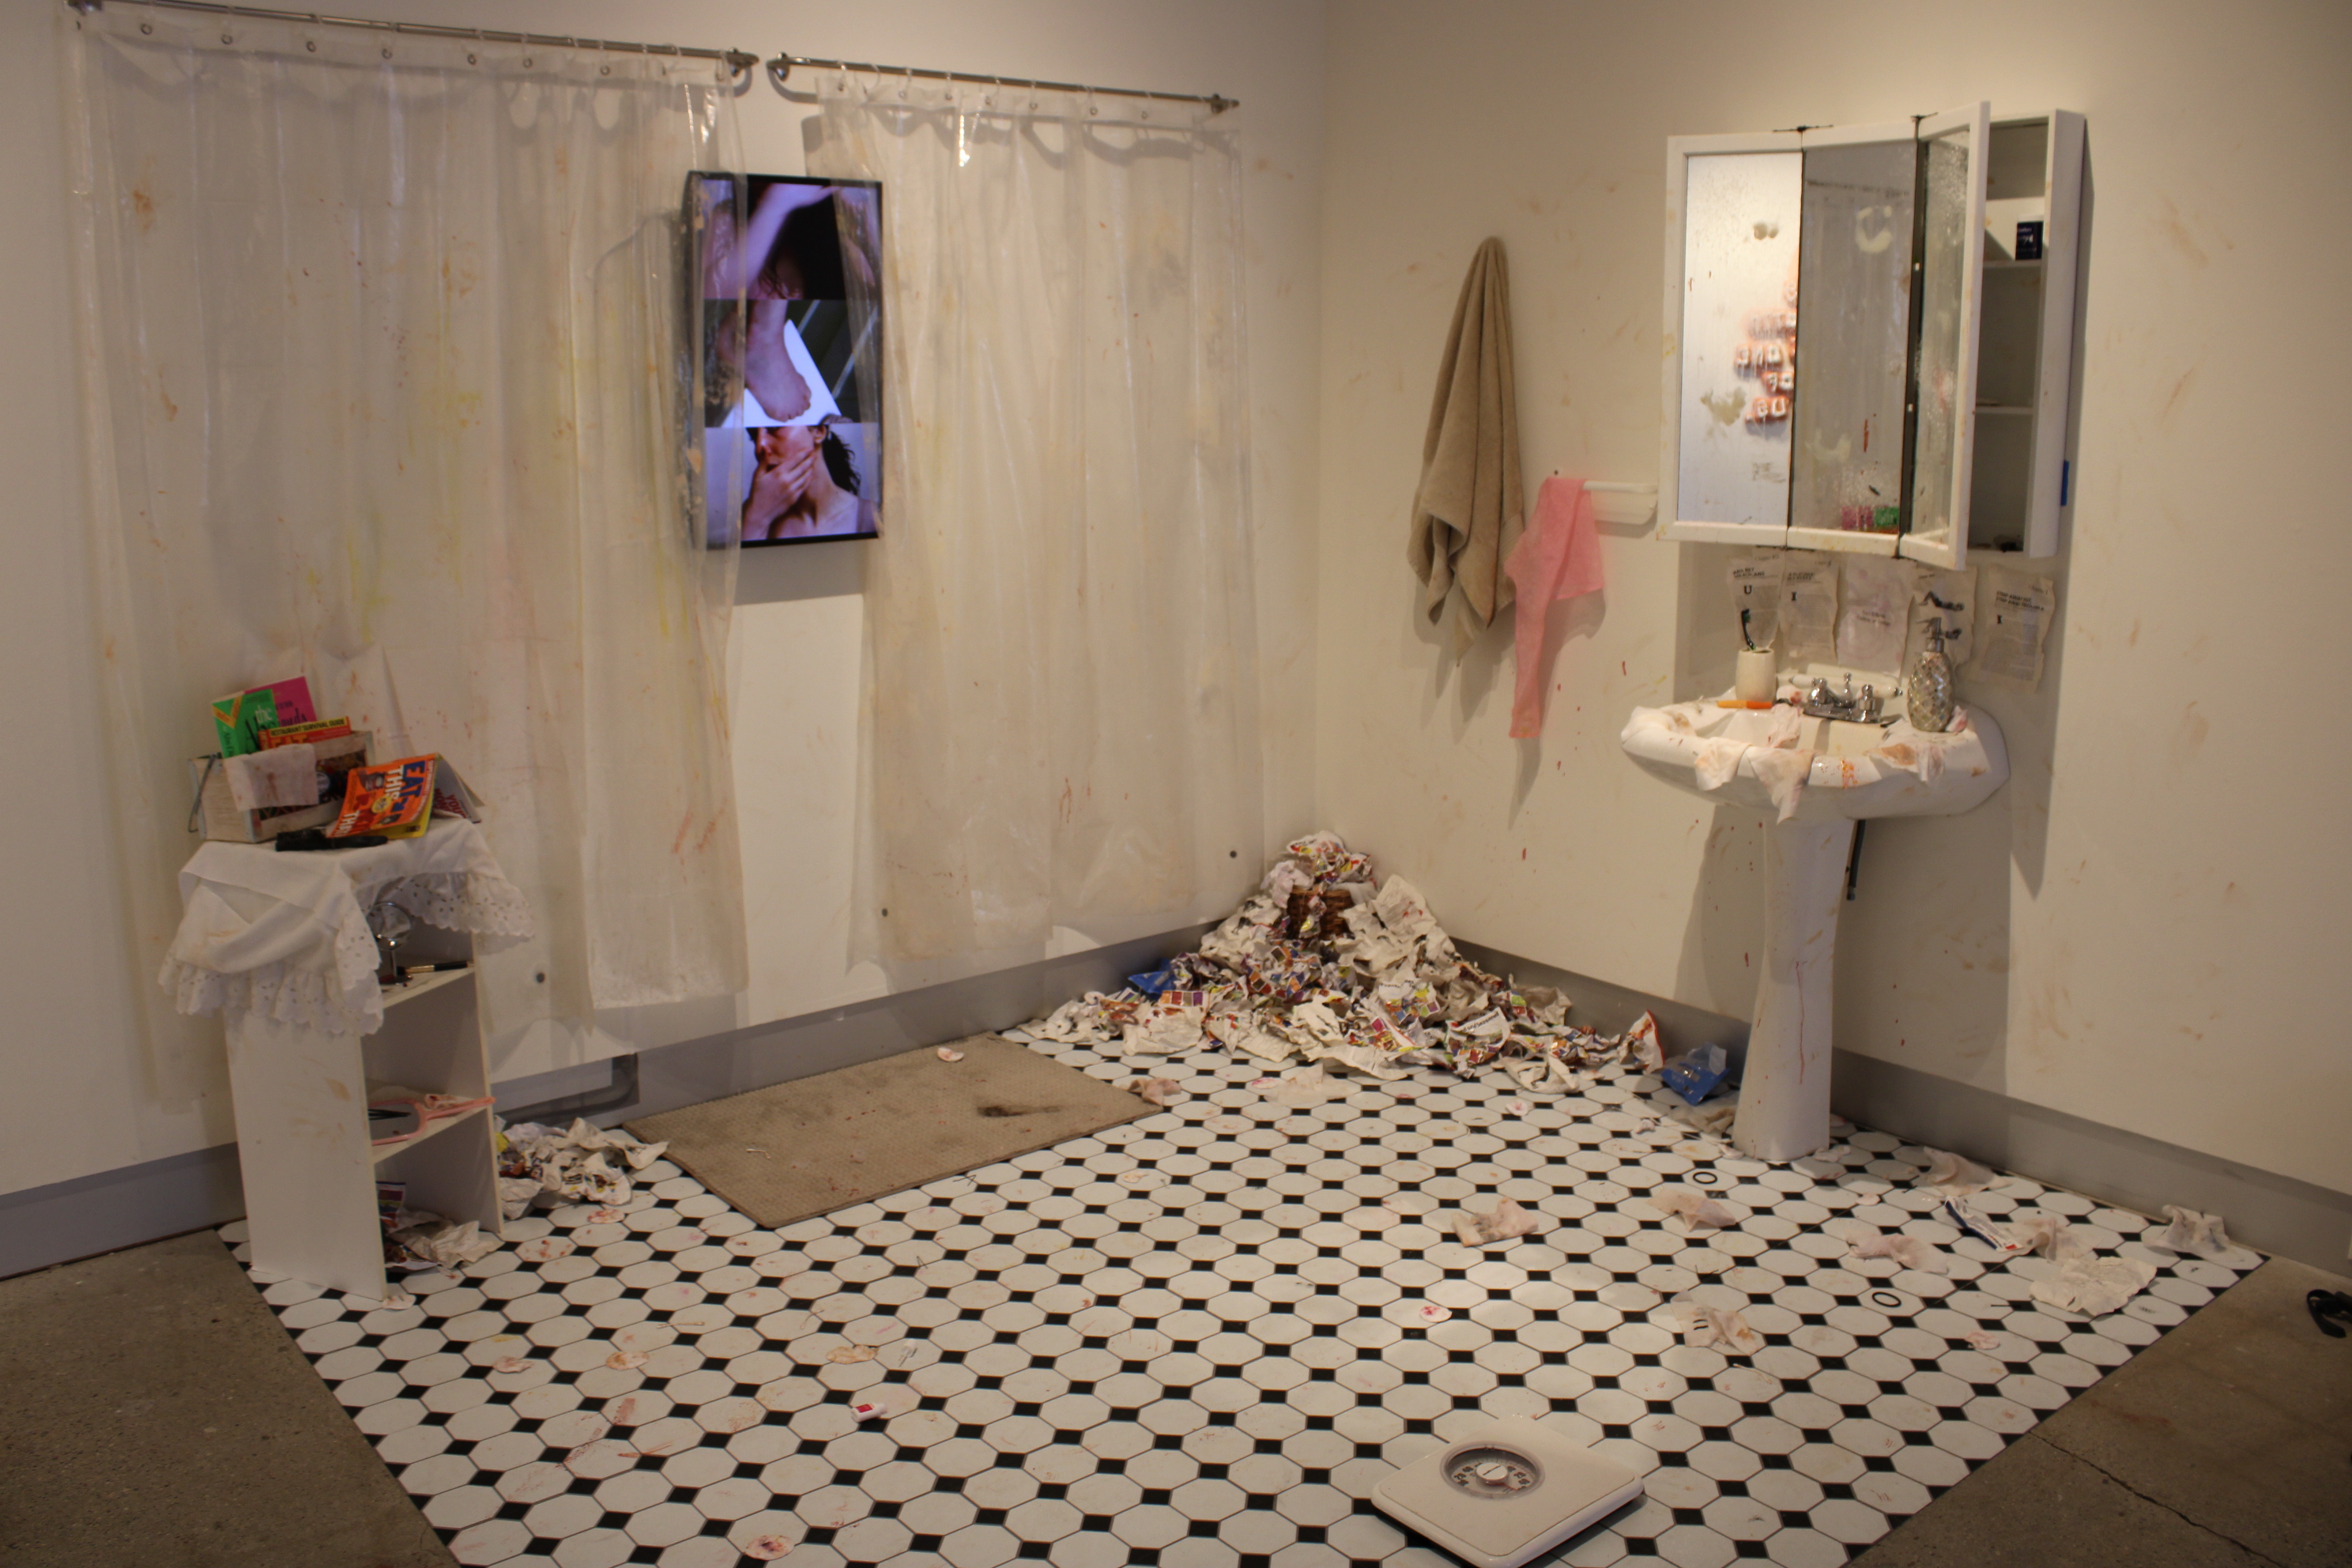 Artwork by Elsie Gray: an installation of a tiled bathroom floor, pedestal sink and mirror, overflowing wastebasket. A small television on the wall plays a video of the artist.